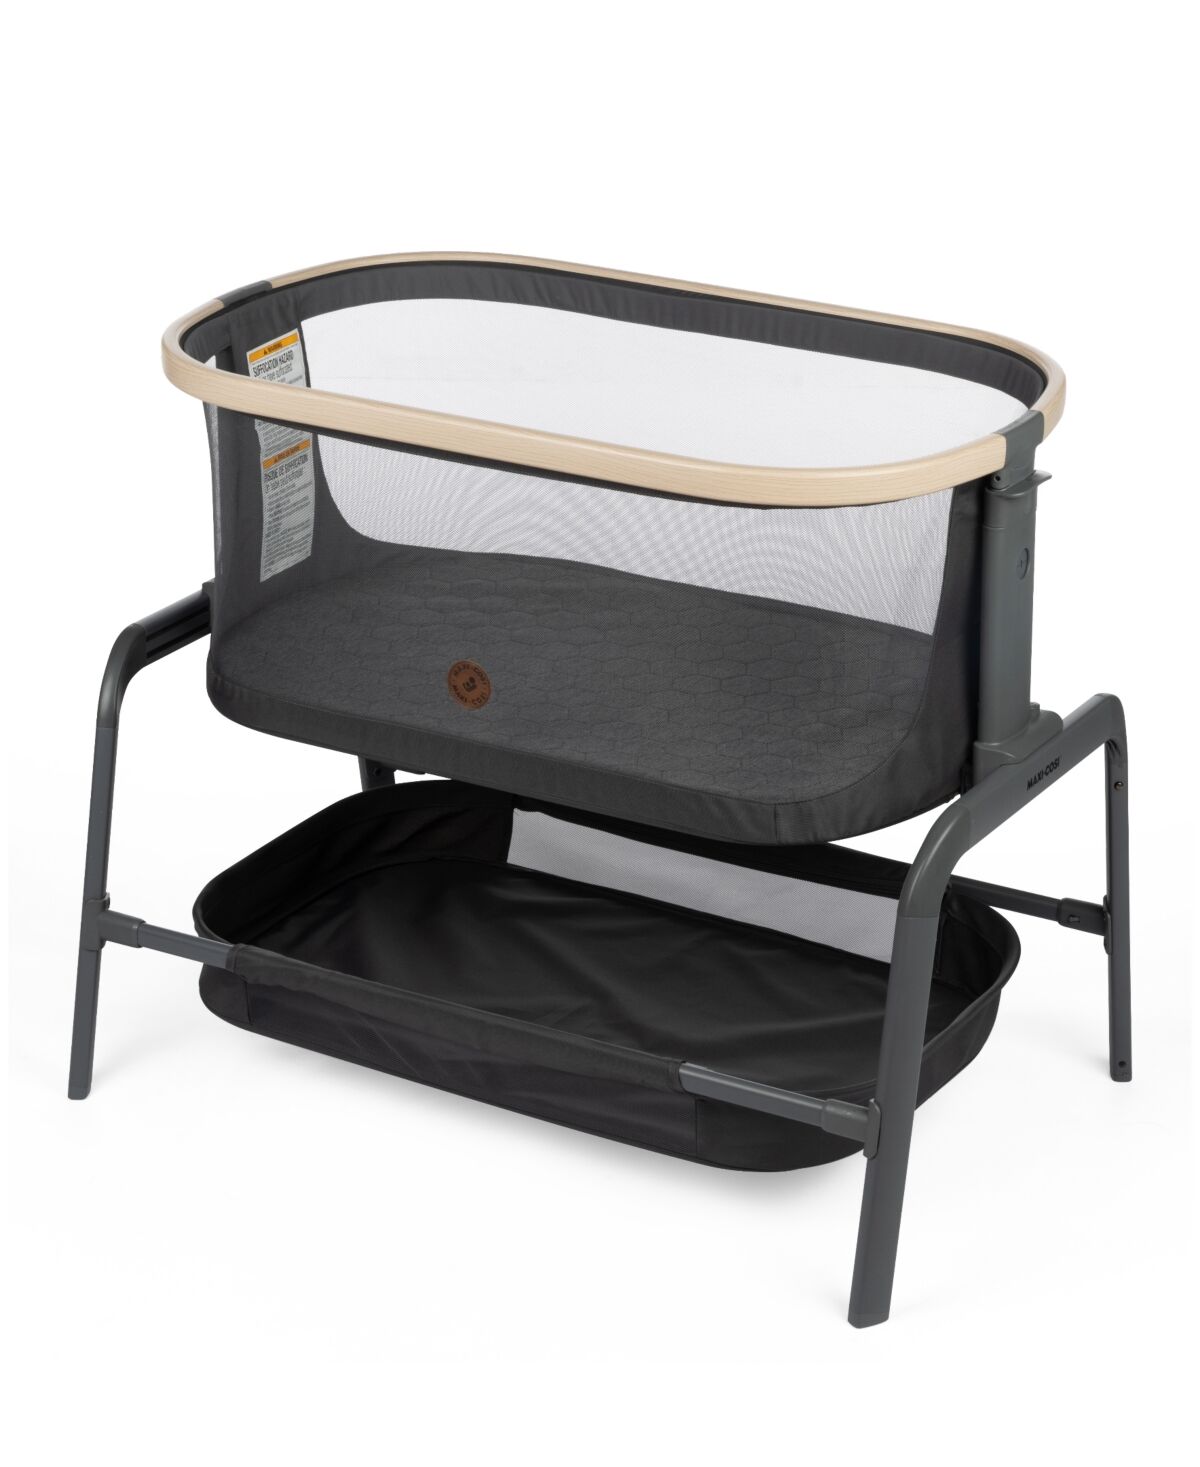 Maxi-Cosi Baby Boys or Baby Girls Iora Bedside Bassinet - Classic Graphite